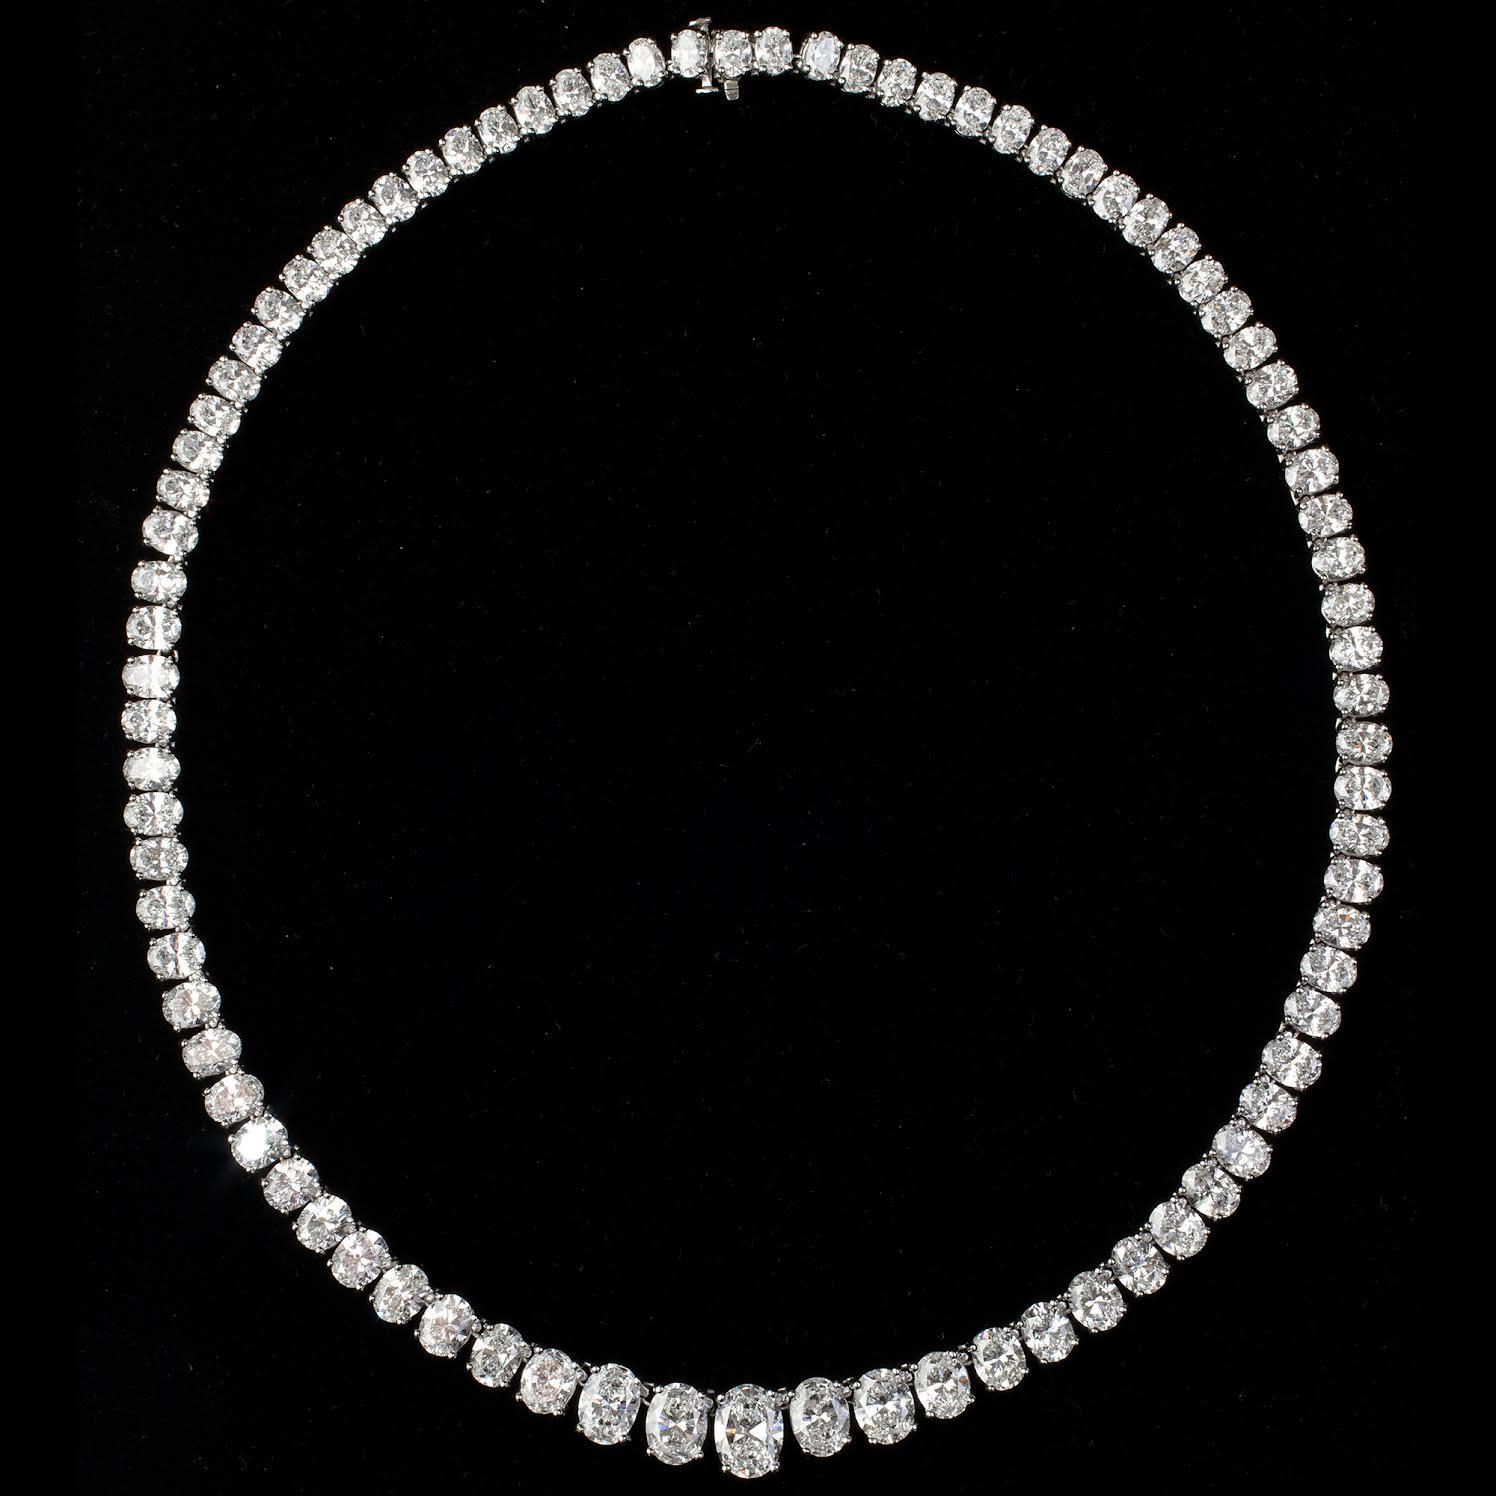 Incredible diamond graduated riviera diamond necklace
crafted in hand made platnium, showcasing extraordinary ideal oval shaped diamonds, 
weighing approximately 45 total carat weight, Diamonds range E-G color
Center stone is a sparkling 2 carat